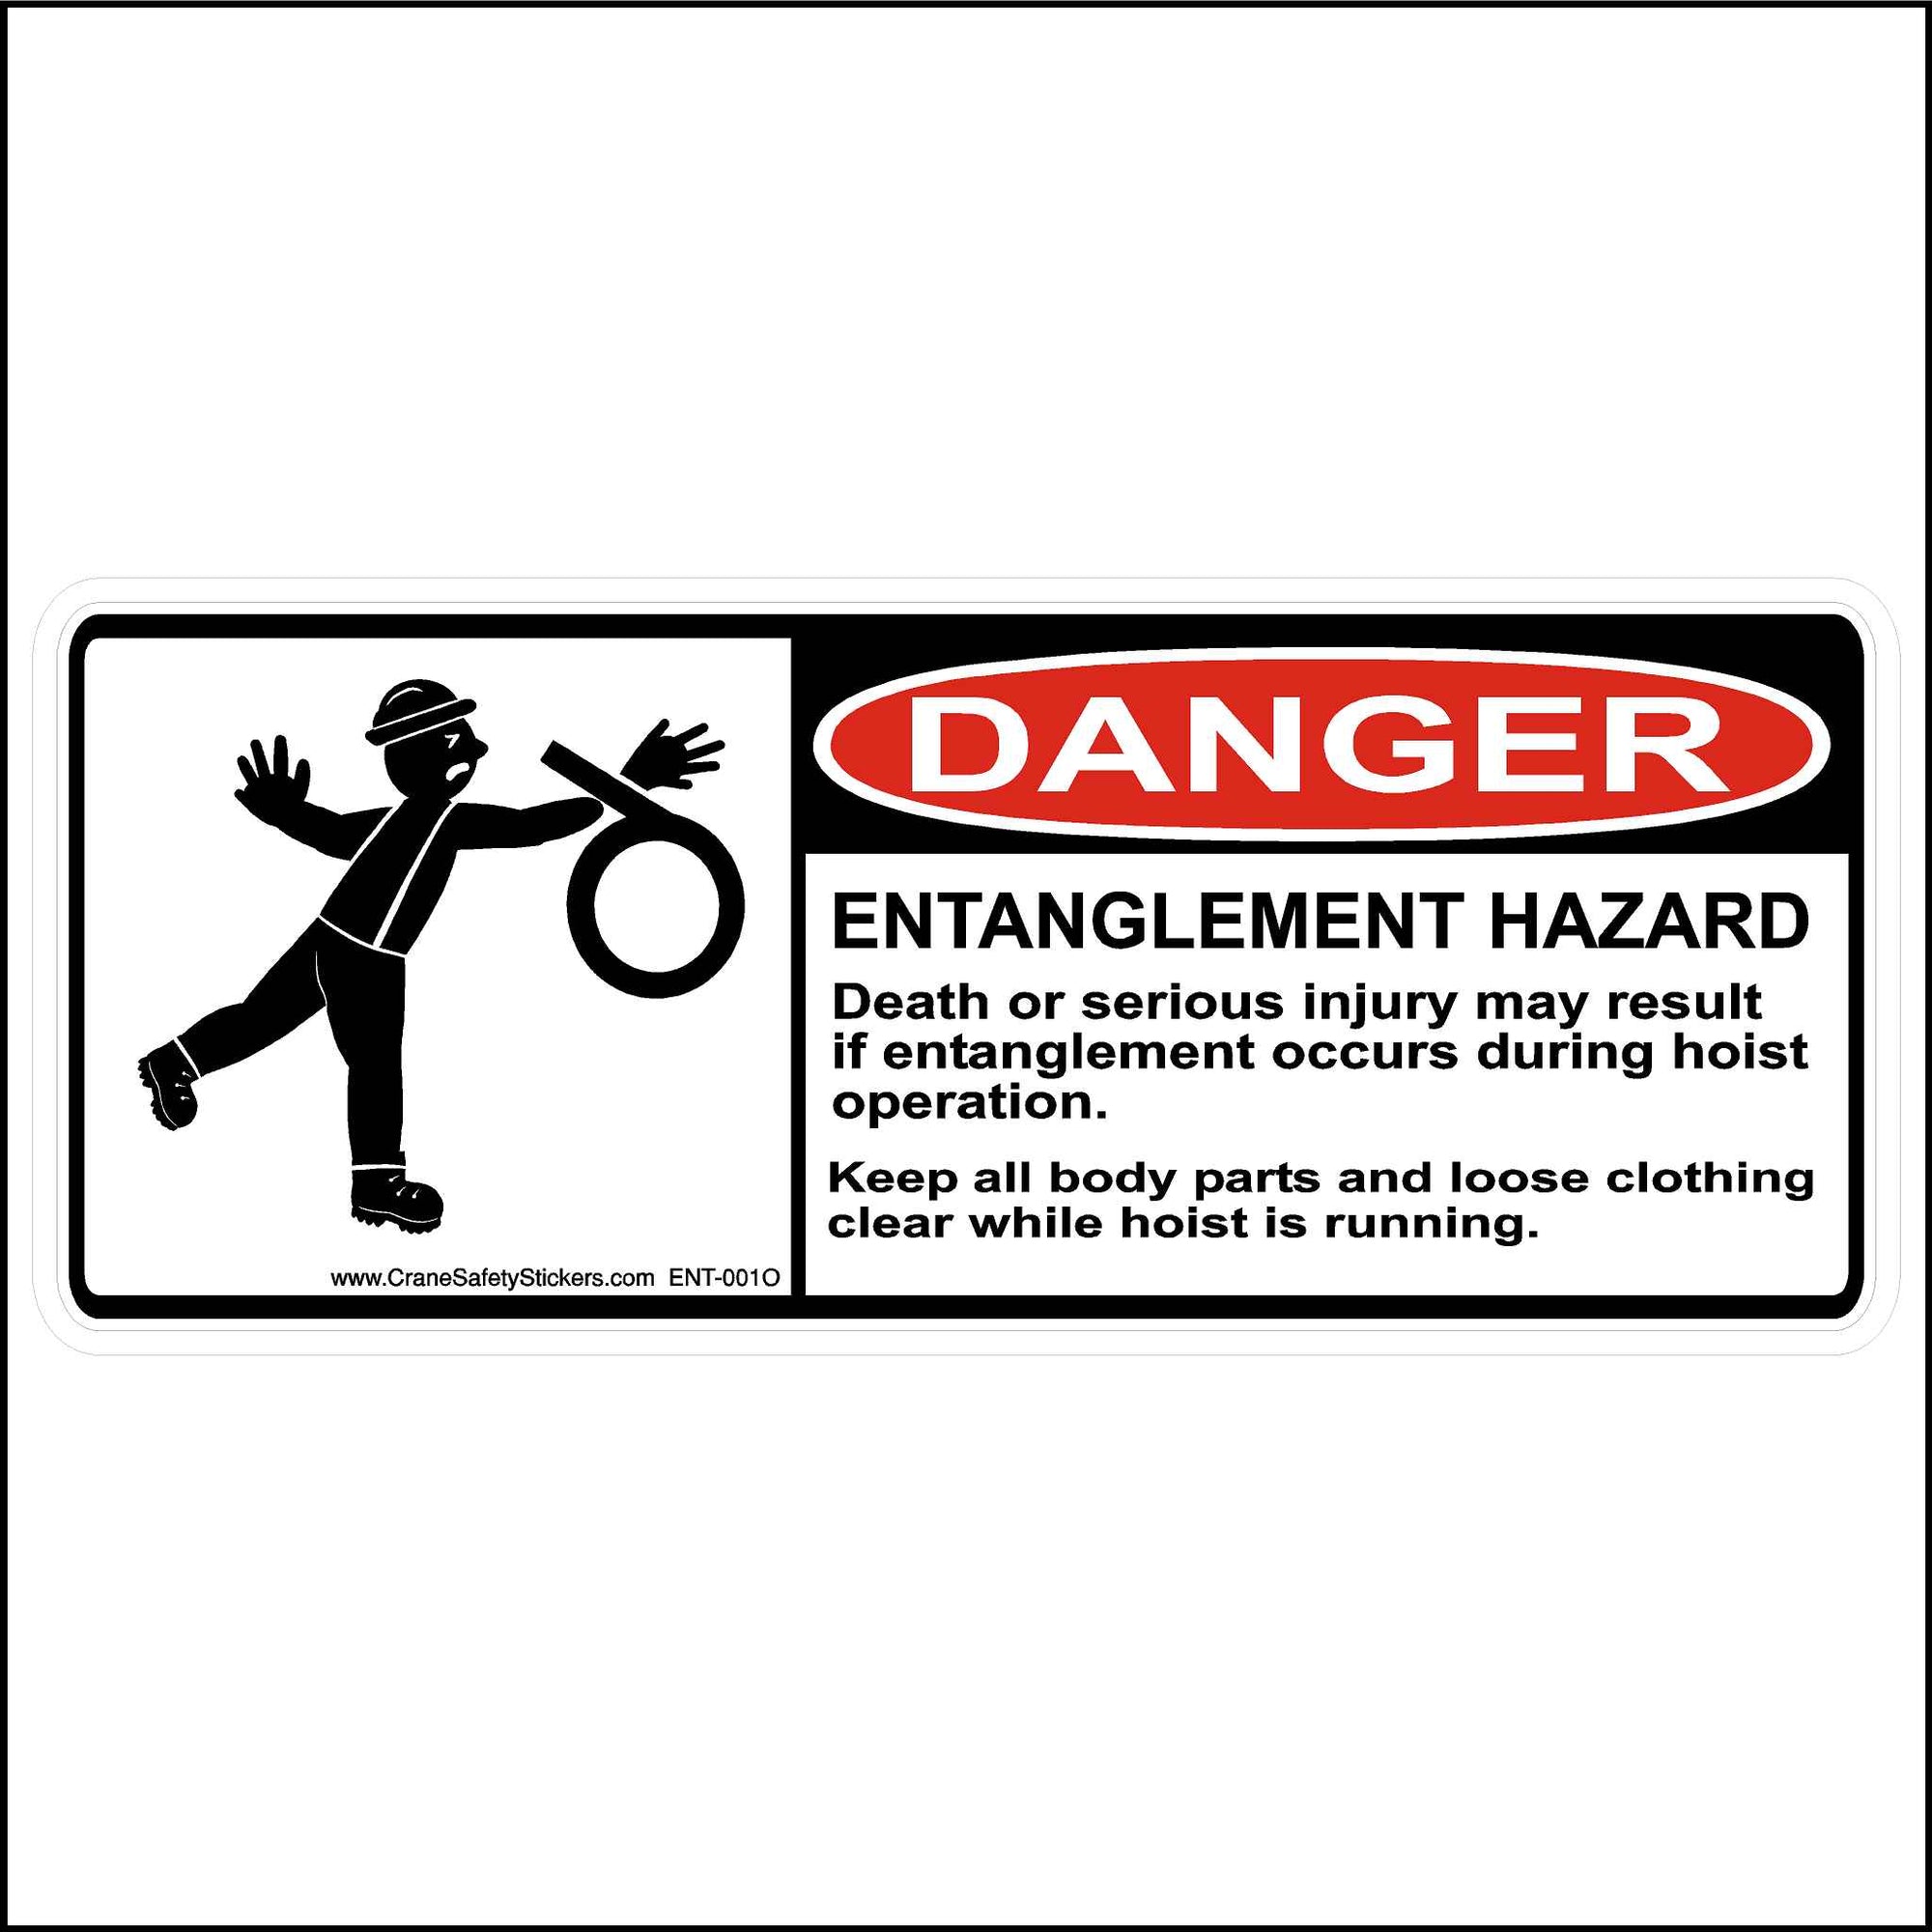 Entanglement Hazard OSHA Safety Label printed with. DANGER Entanglement Hazard, Serious injury may result if entanglement occurs during hoist operation. Keep all body parts and clothing clear while hoist is running. 